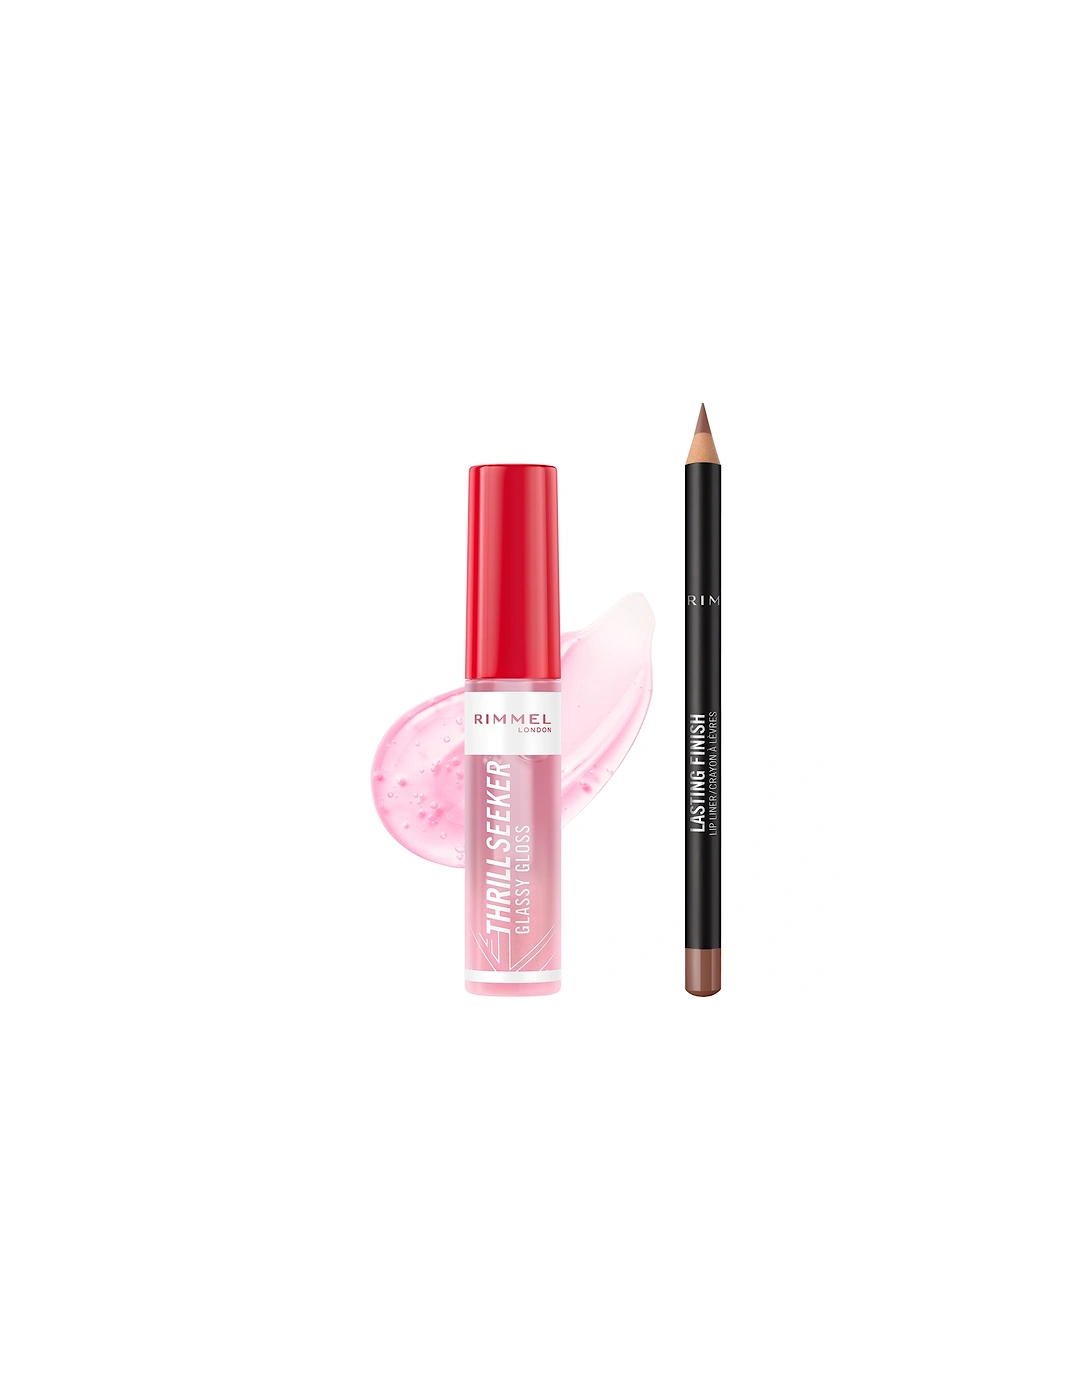 Thrill Seeker Glassy Gloss and Lasting Finish Lip Liner - 100 Coco Suga, 2 of 1